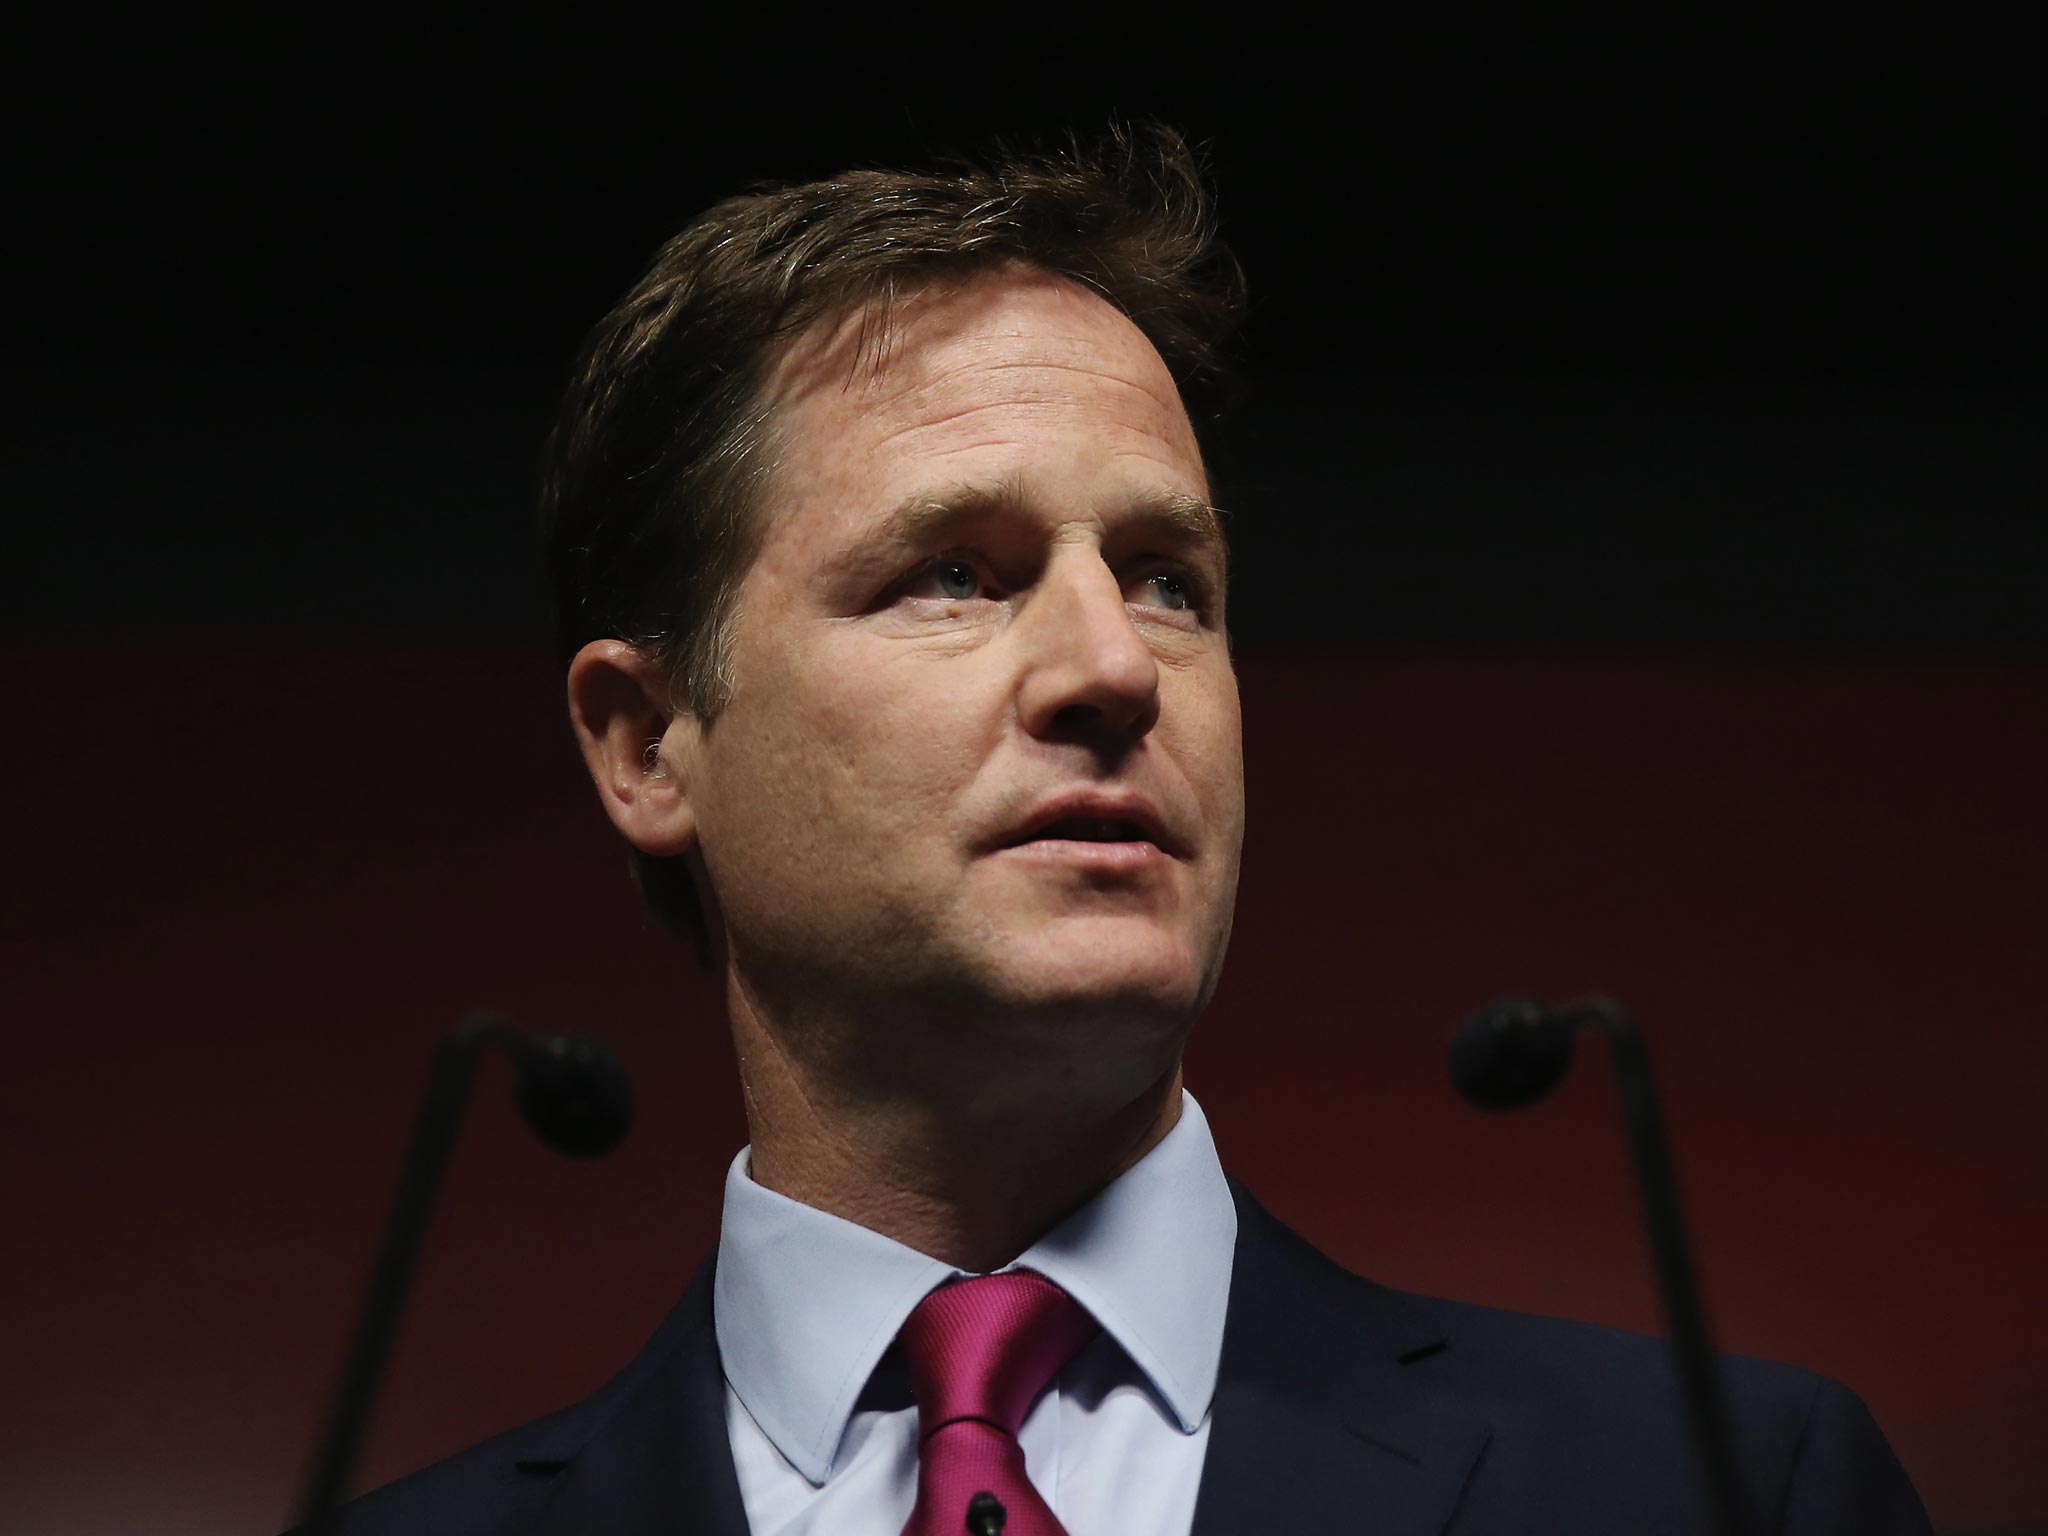 Forthcoming drama Coalition will explore Nick Clegg's rise to power